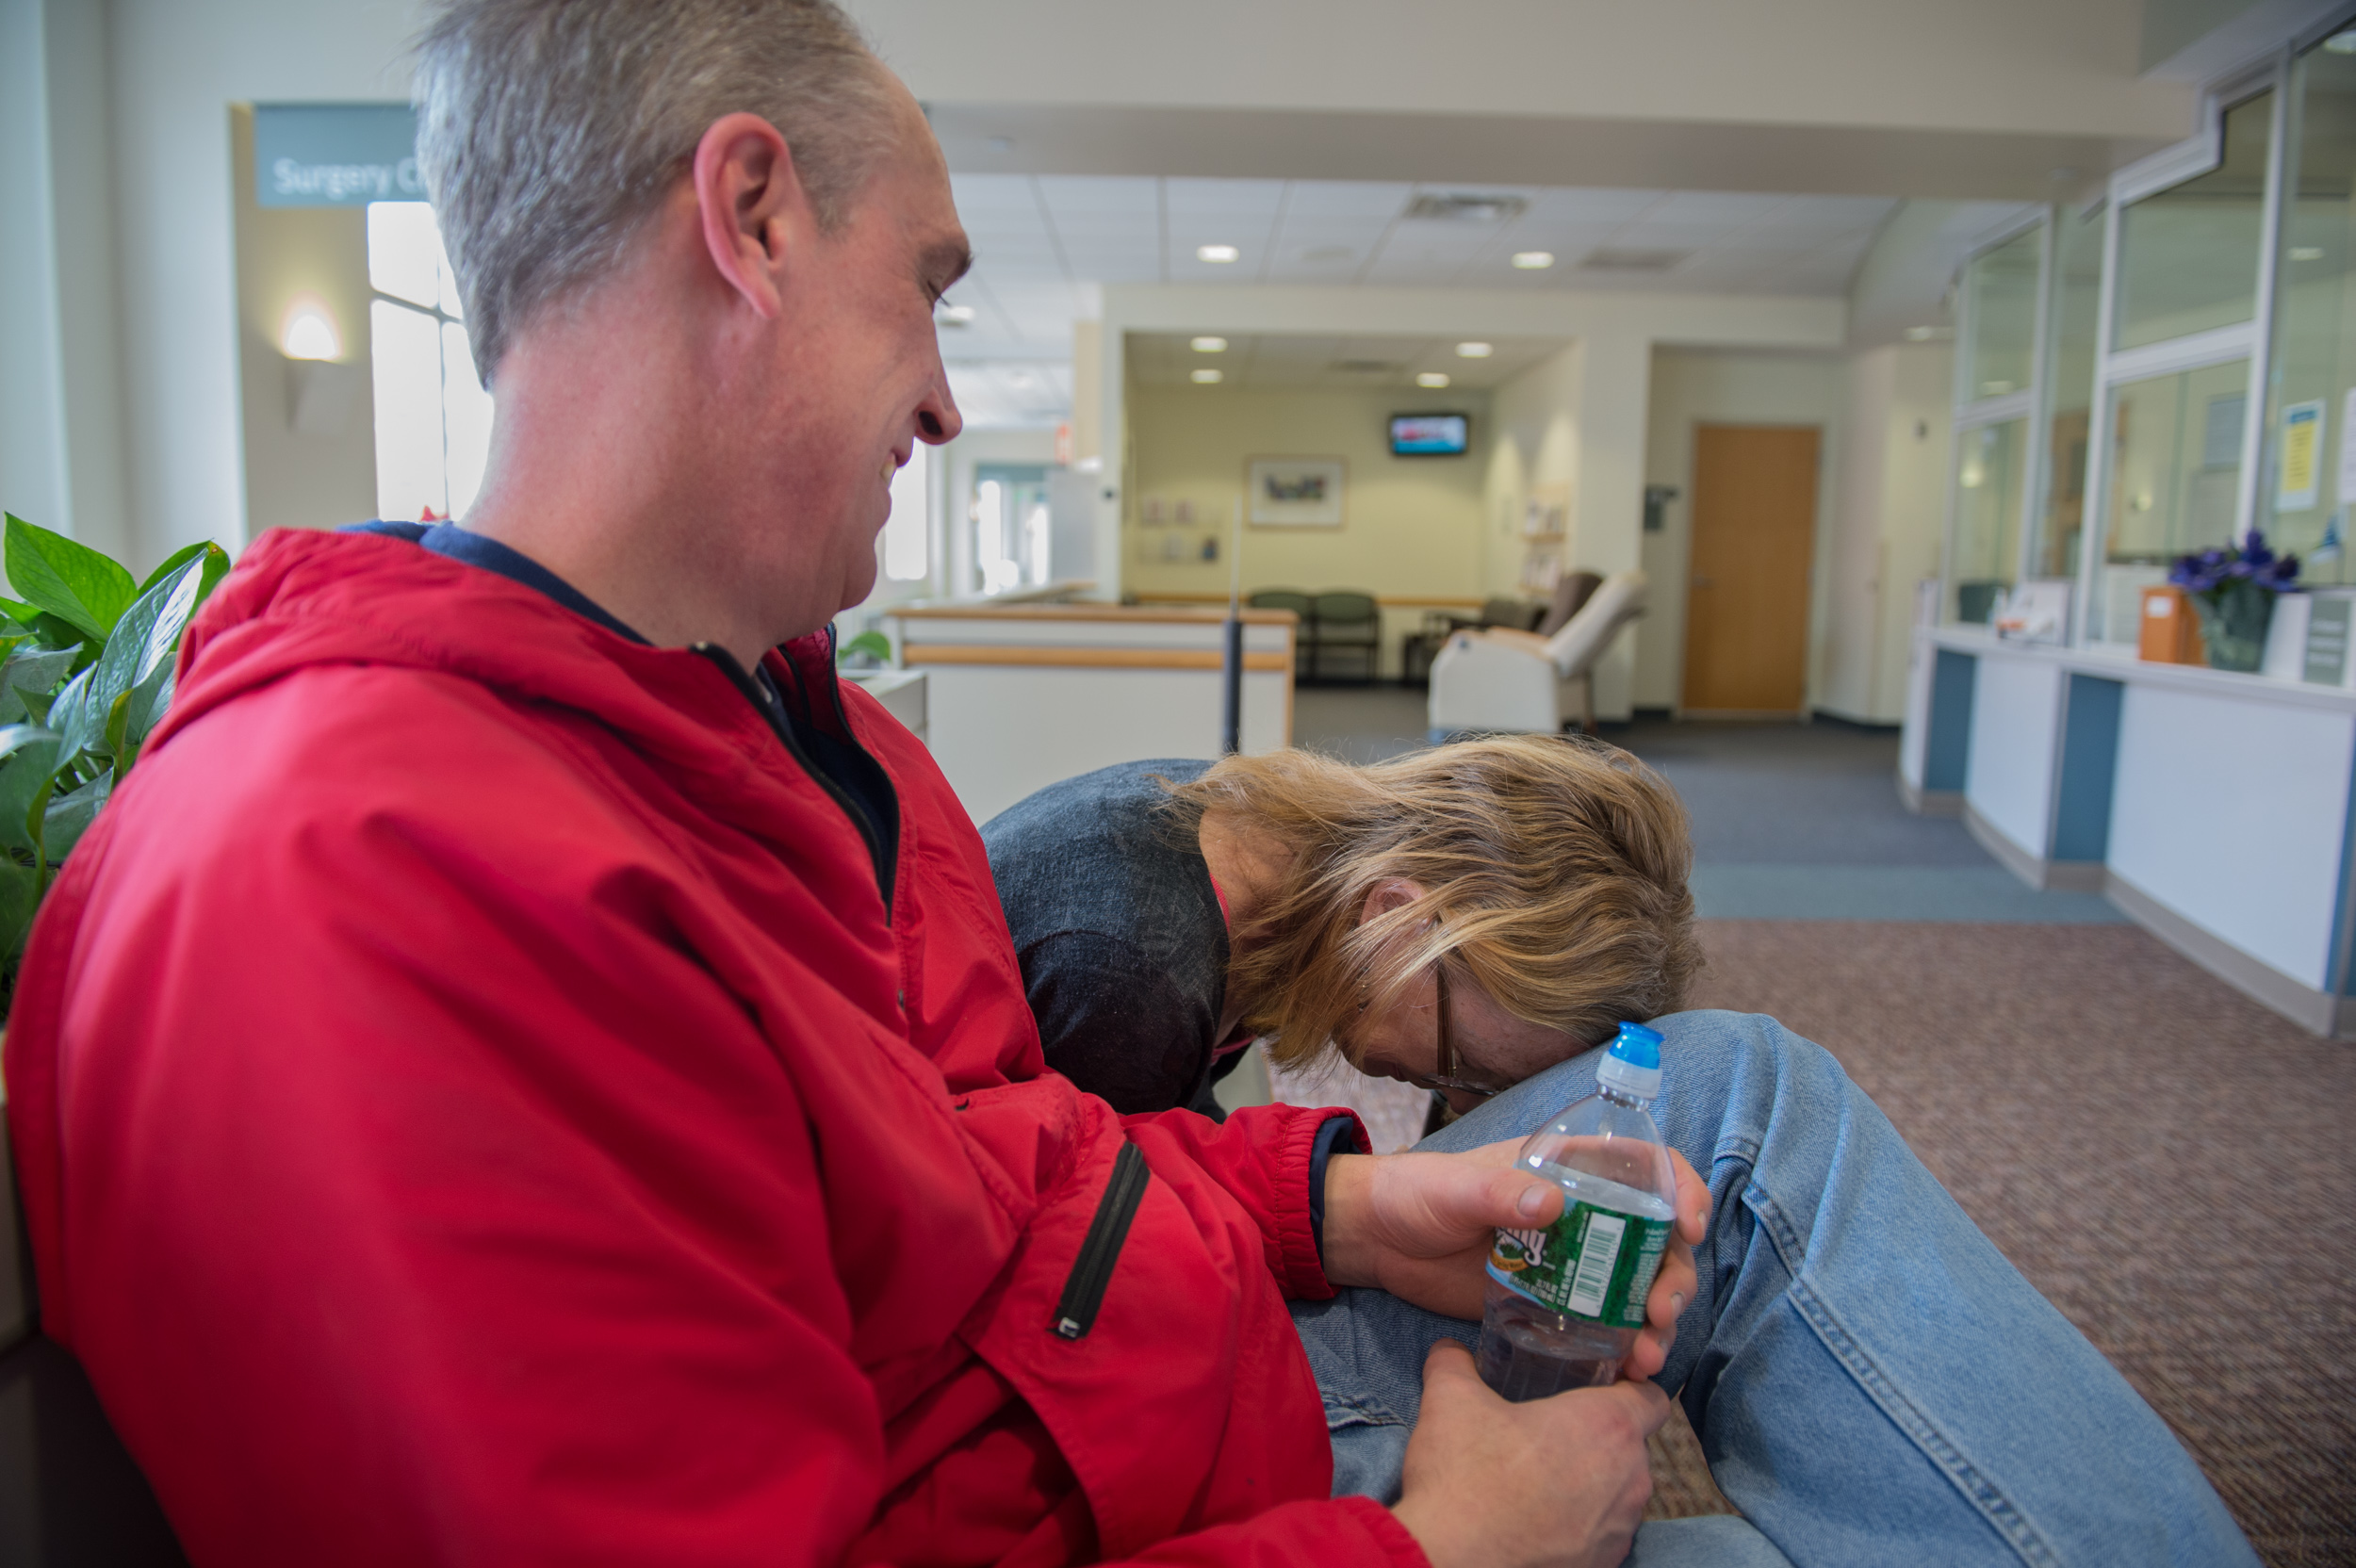  Carol places her head on her friend Erik Lacelle's knee after having a tube removed from her lungs at Strong Memorial Hospital in Rochester on Thursday, April 2, 2015. "Erik's a good guy," she said. "Sometimes he comes over on the weekends and we ha